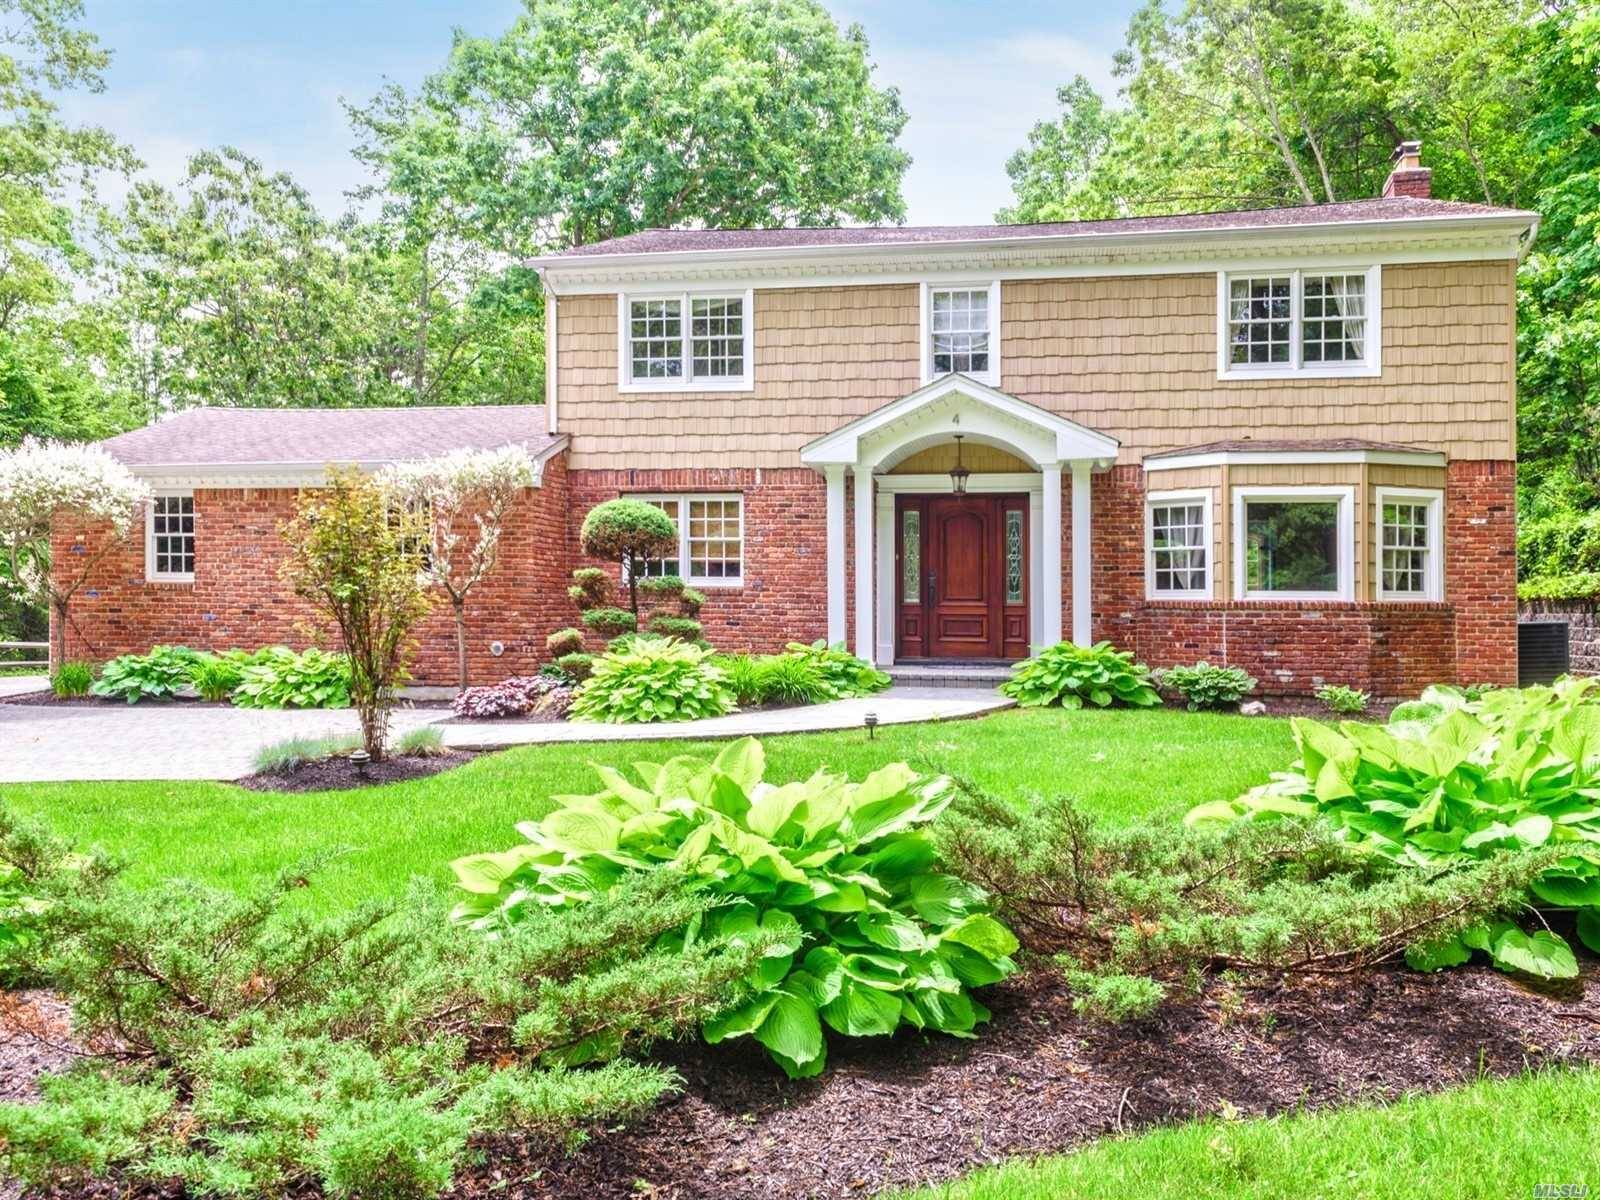 Dix Hills Spectacular, Grand, Updated Center Hall Colonial in desirable Winston Woods.